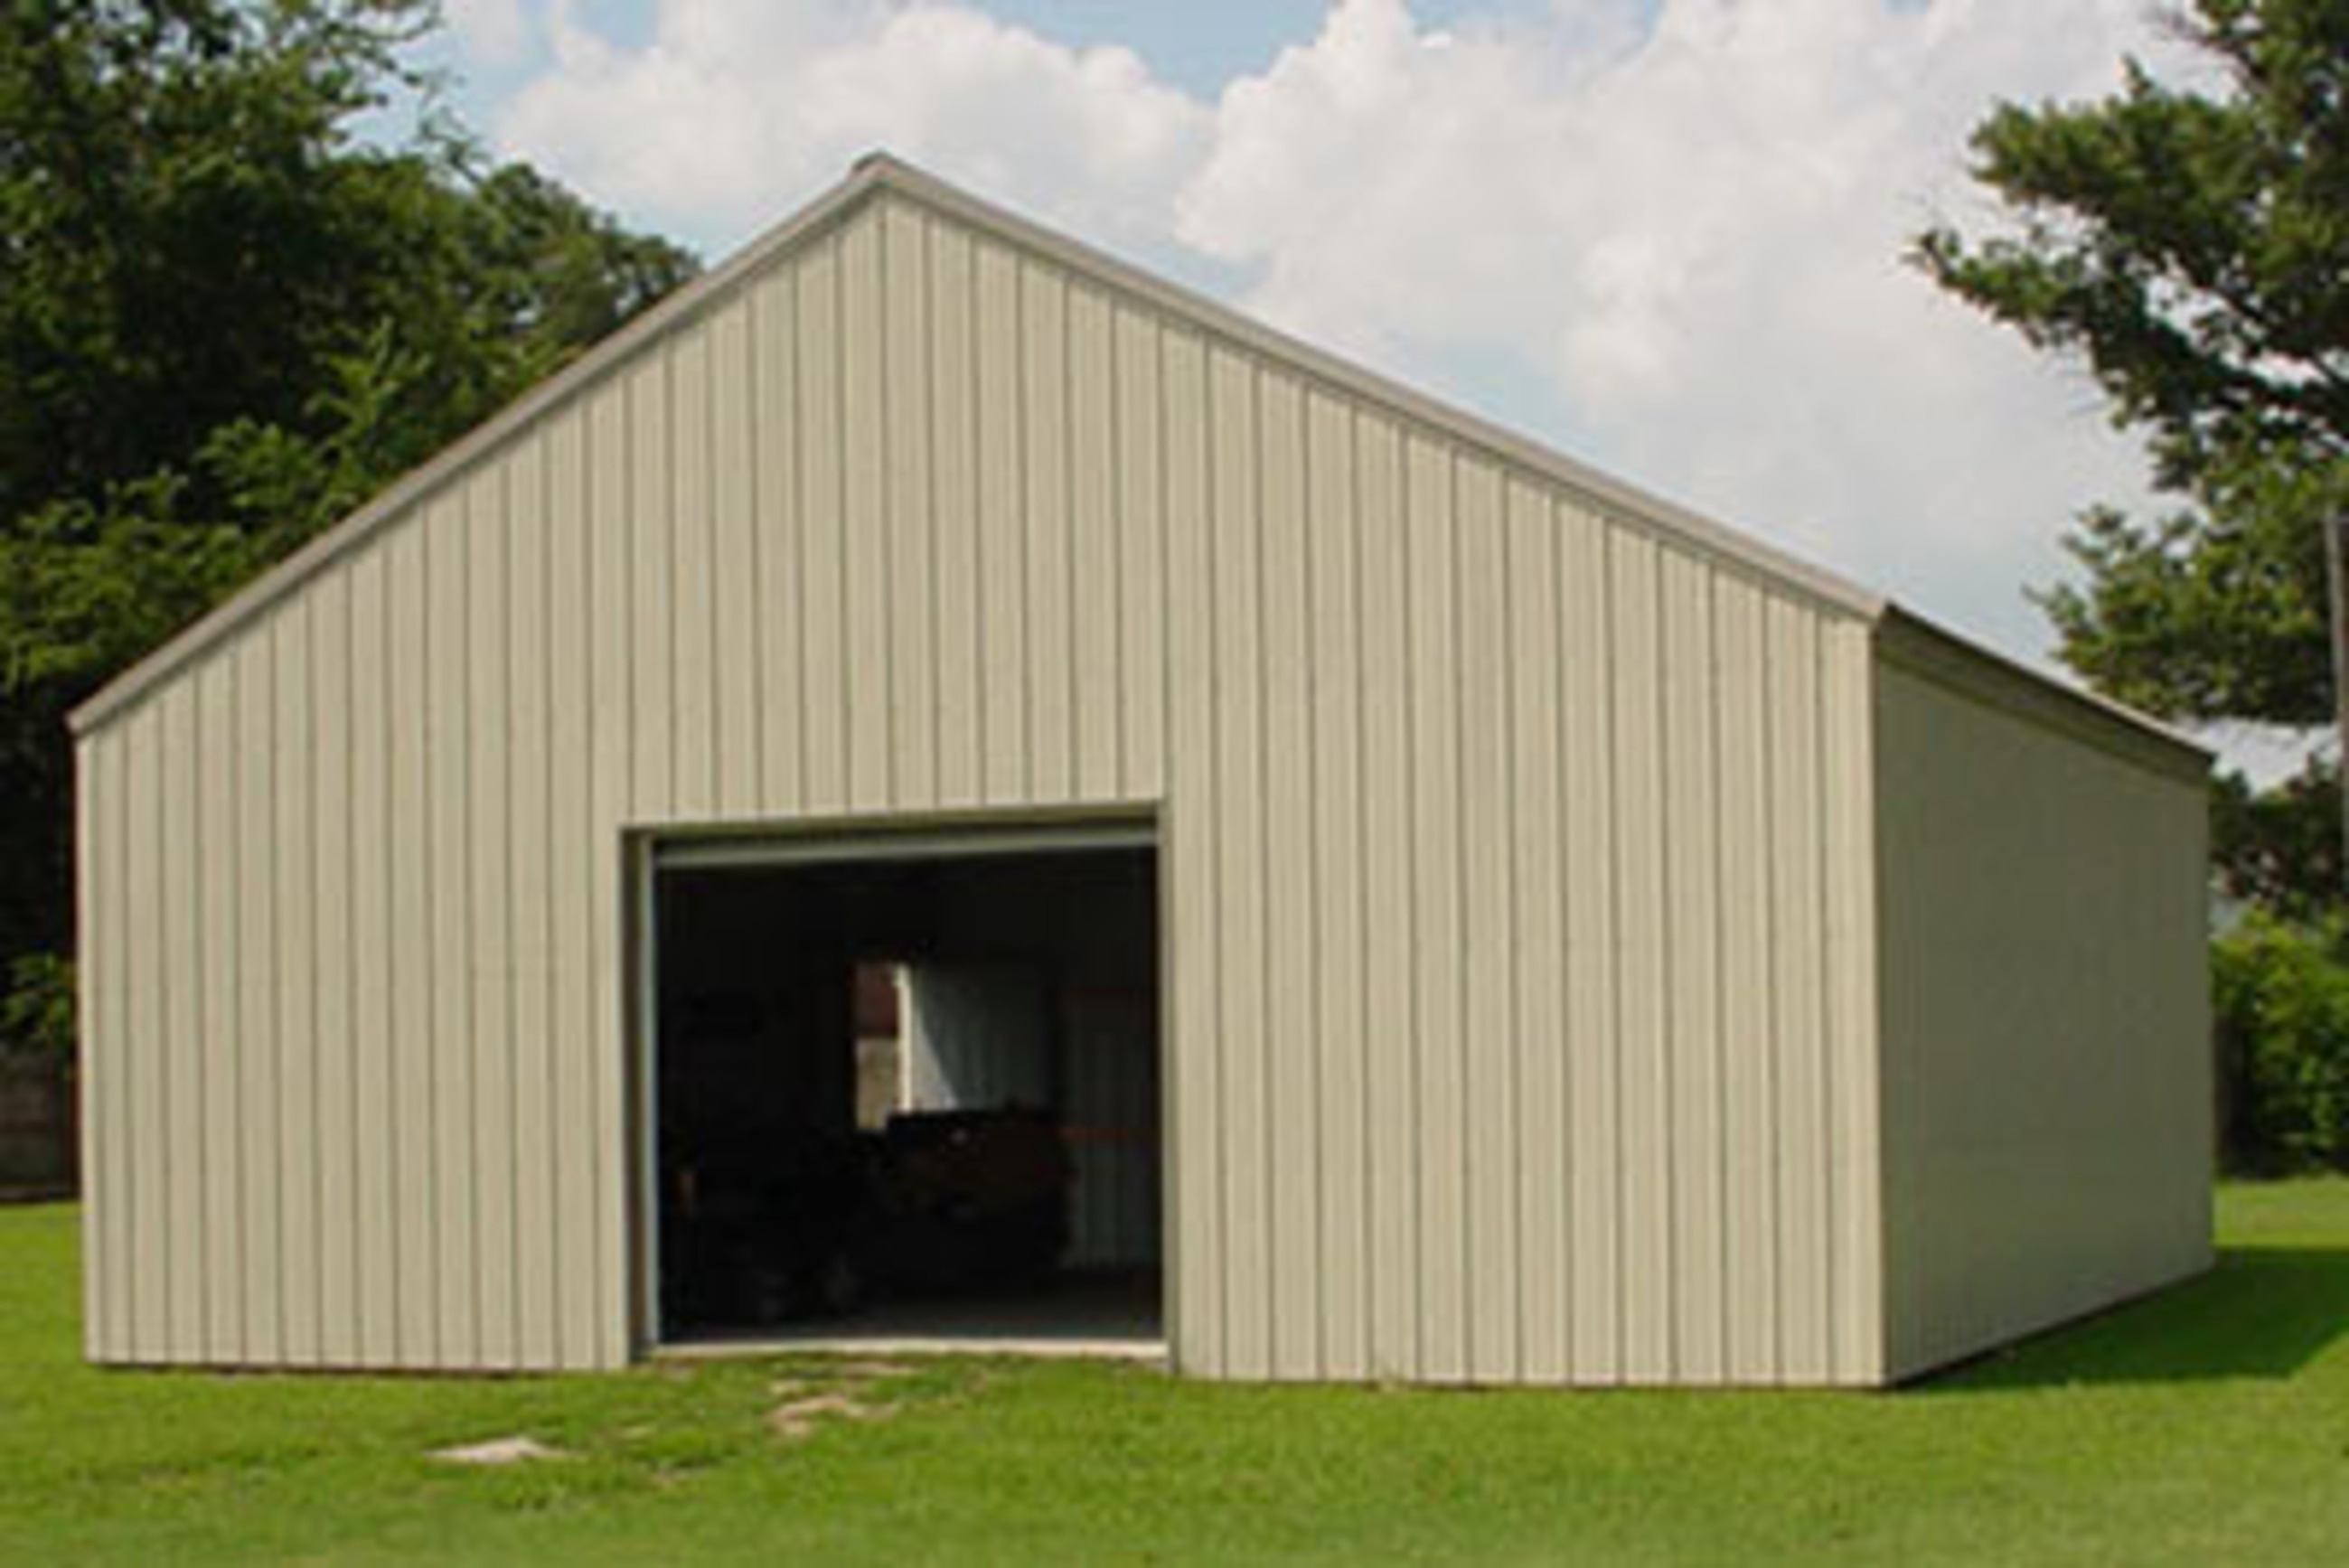 Red Iron Kits Florida FL | Steel Building Packages Florida FL